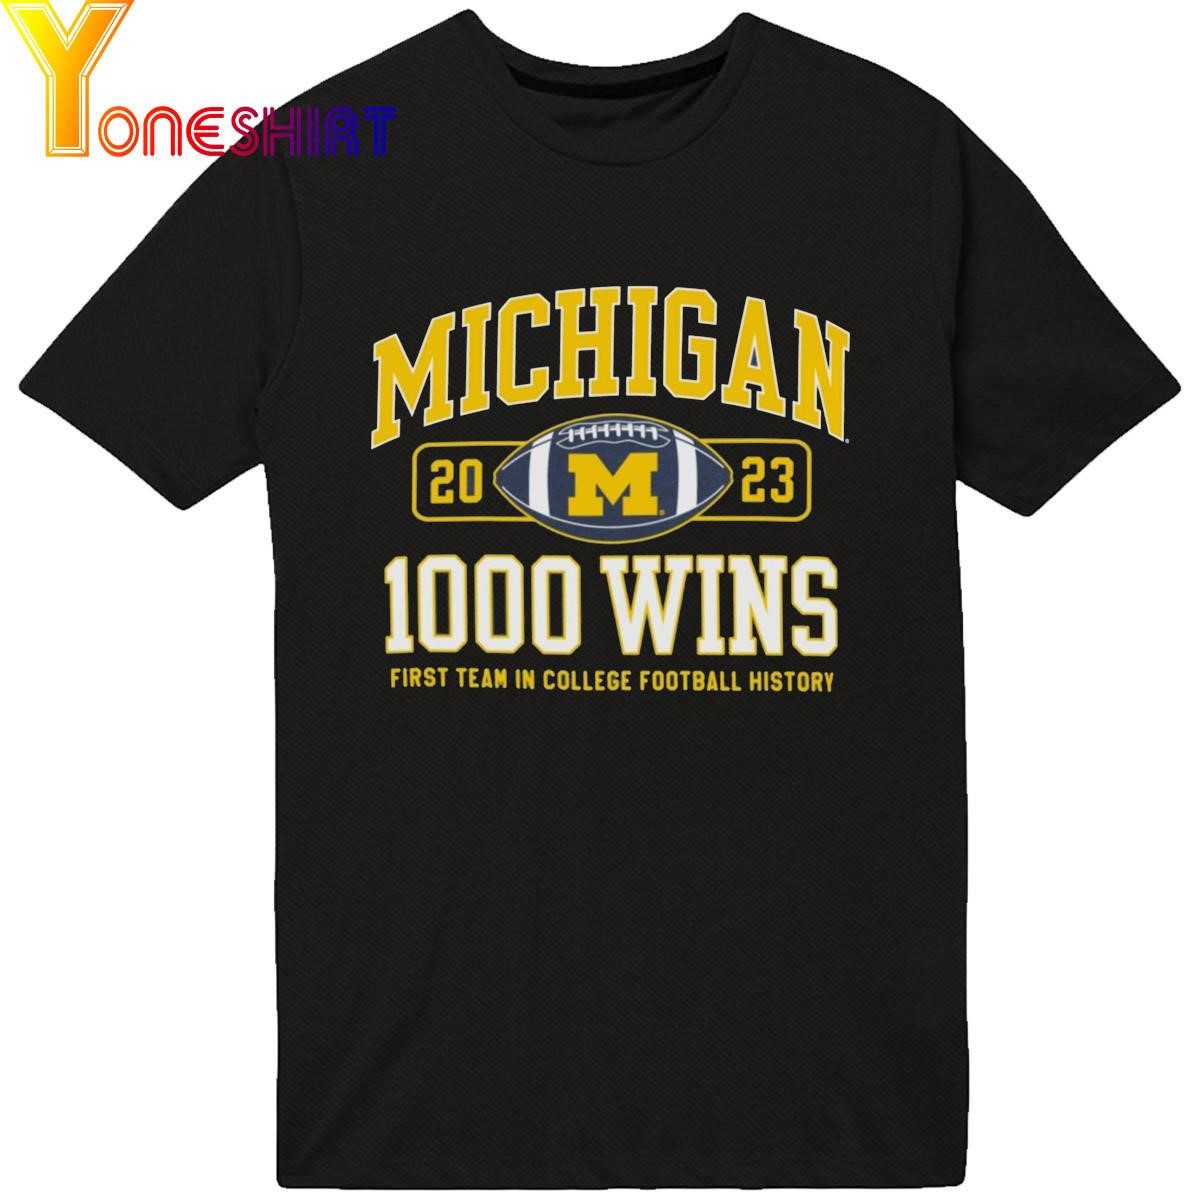 Michigan Wolverines 1000 Wins First Team in college football history 2023 Shirt